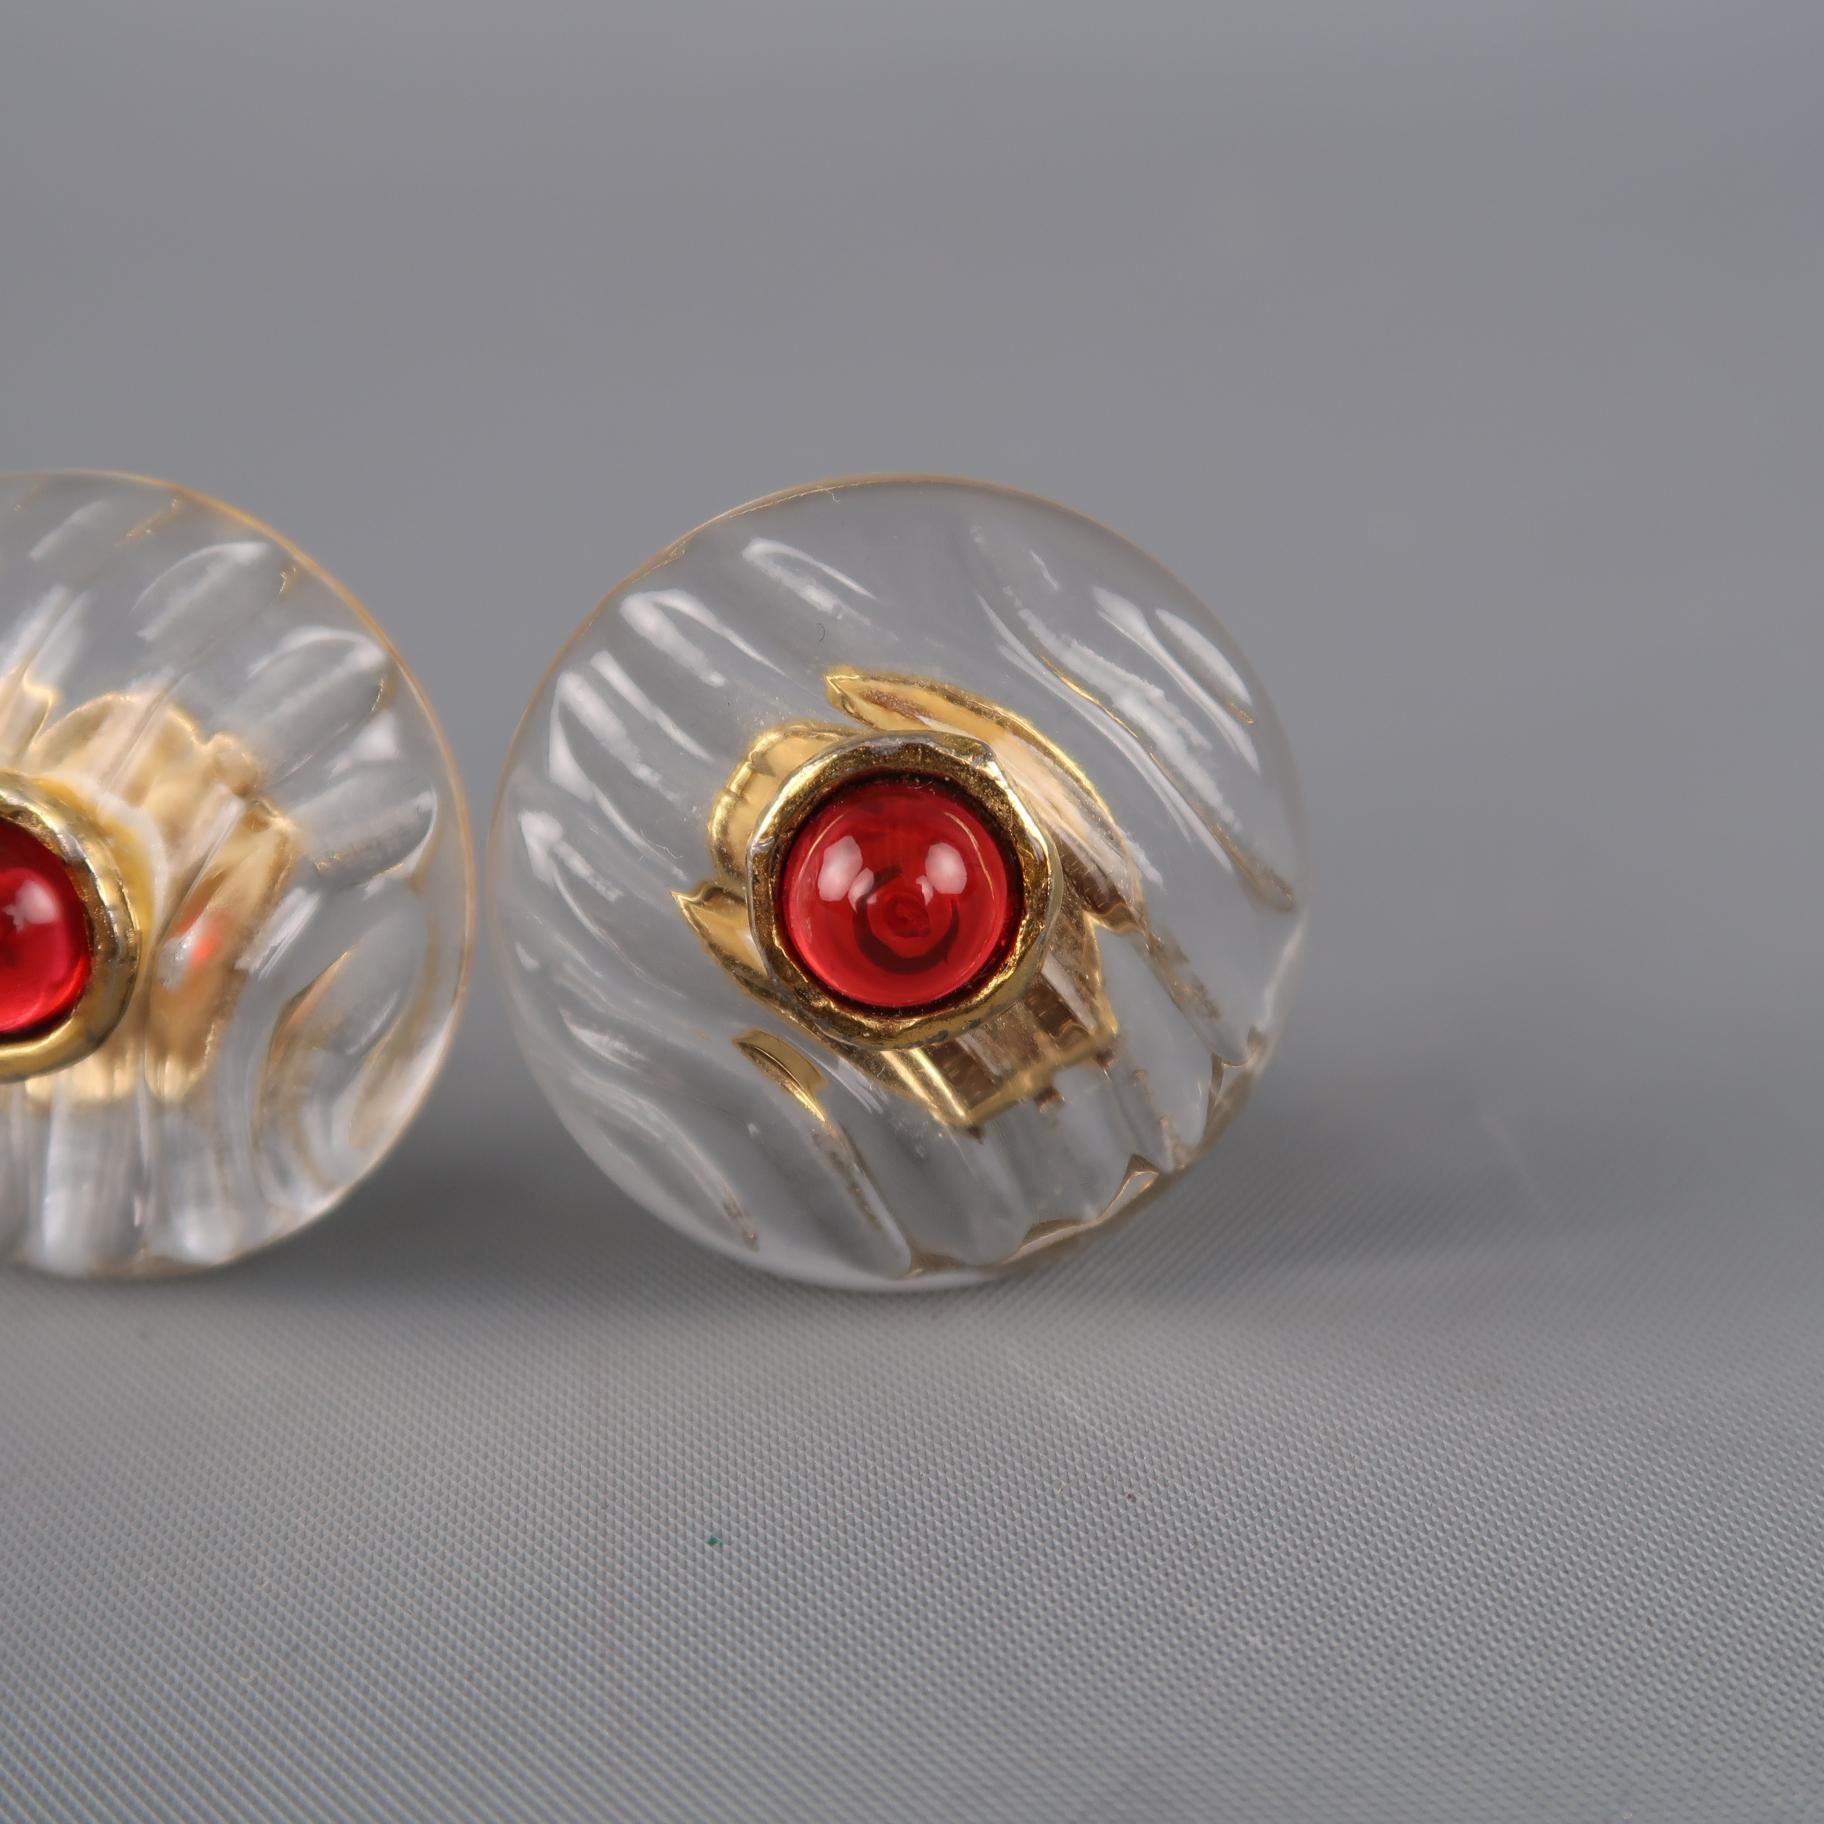 Vintage CHANEL clip on earrings feature round textured clear lucite bases adorned with a red faux gem stone encased with yellow gold tone metal boarder and clip on back. Minor wear. As-is. Made in France.
 
Vintage, Good Pre-Owned Condition.
 
1.25